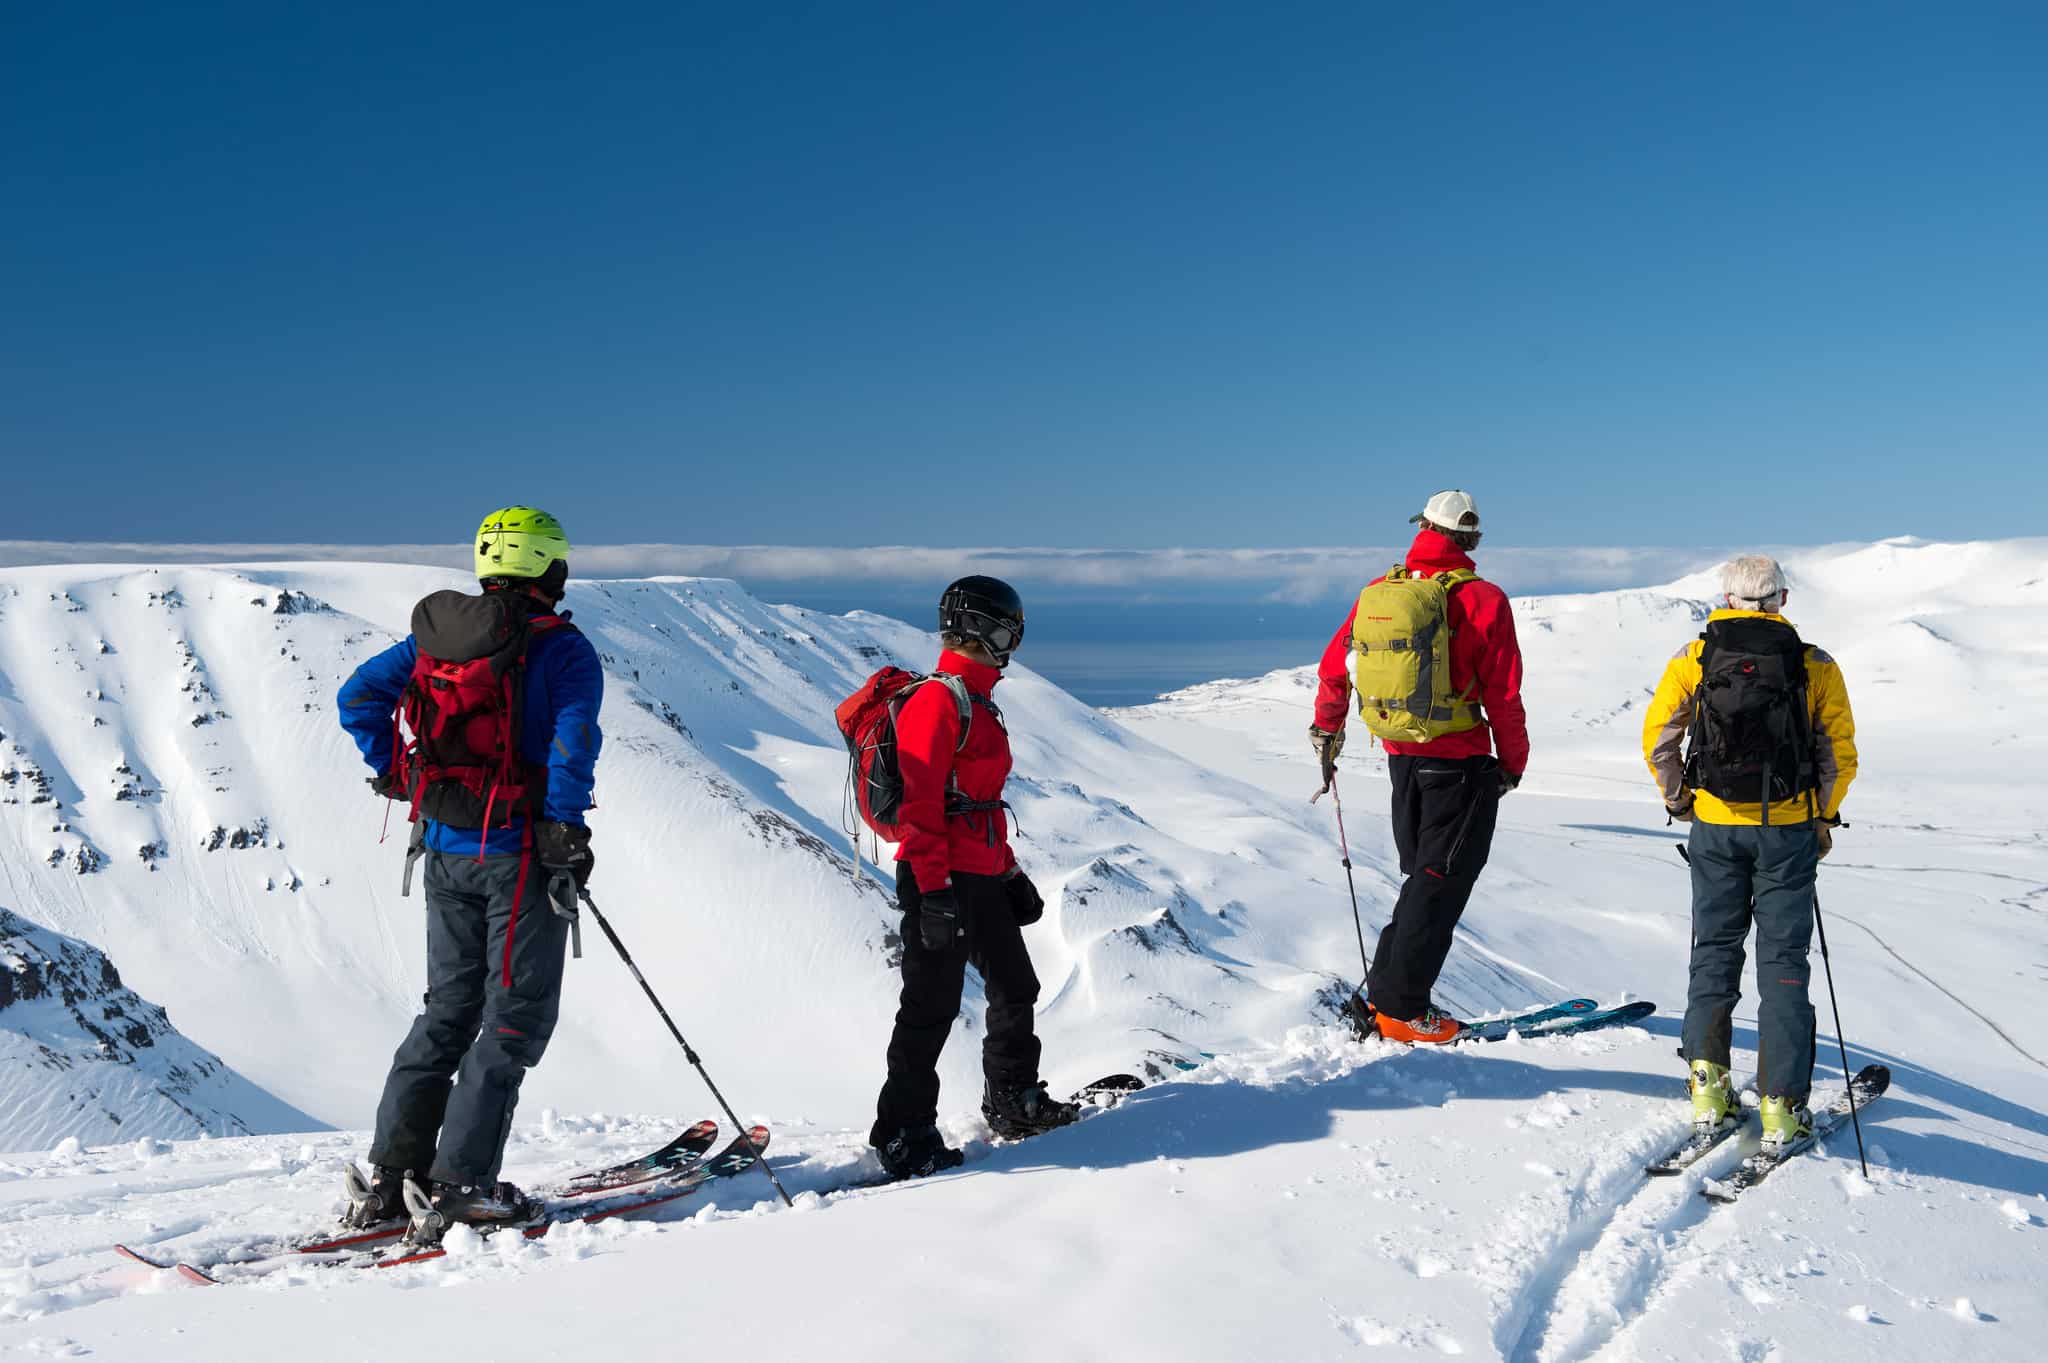 Iceland Heli Skiing And Ski Touring On Top Of The World